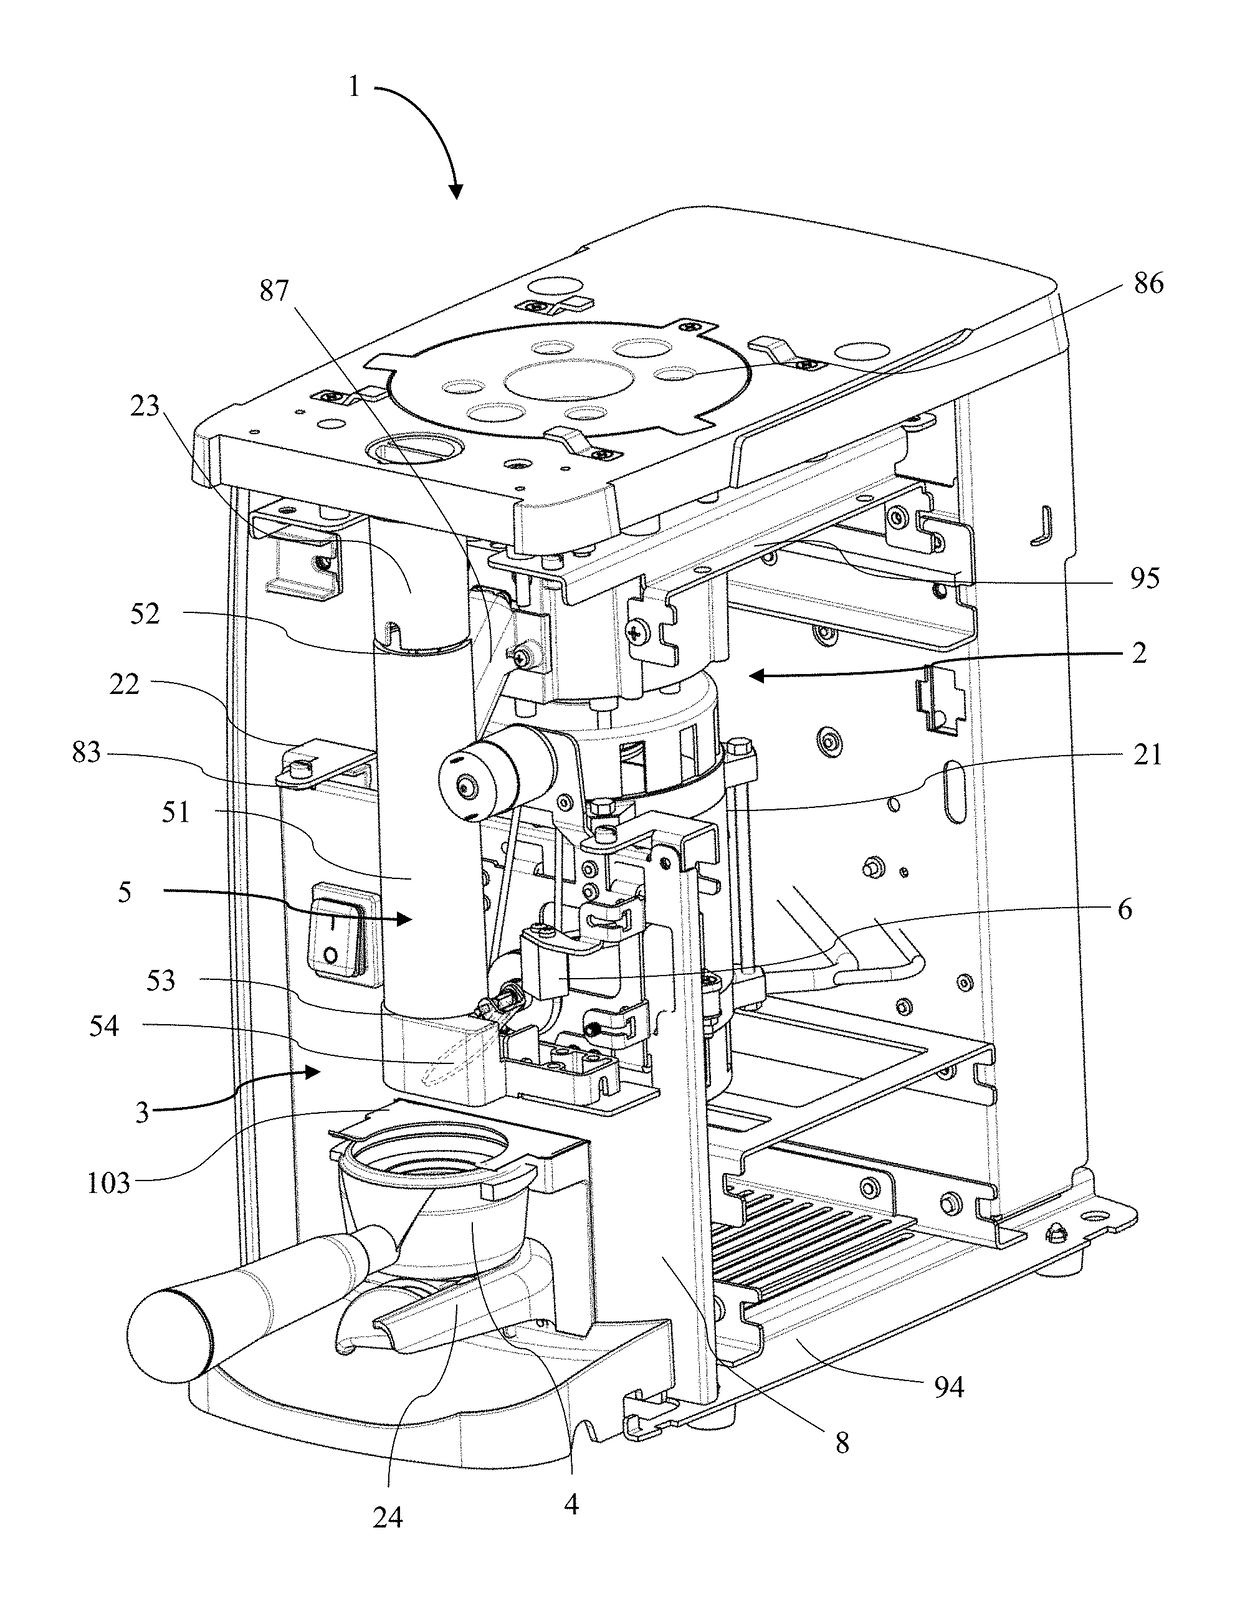 Method and machine for dispensing doses of coffee grounds